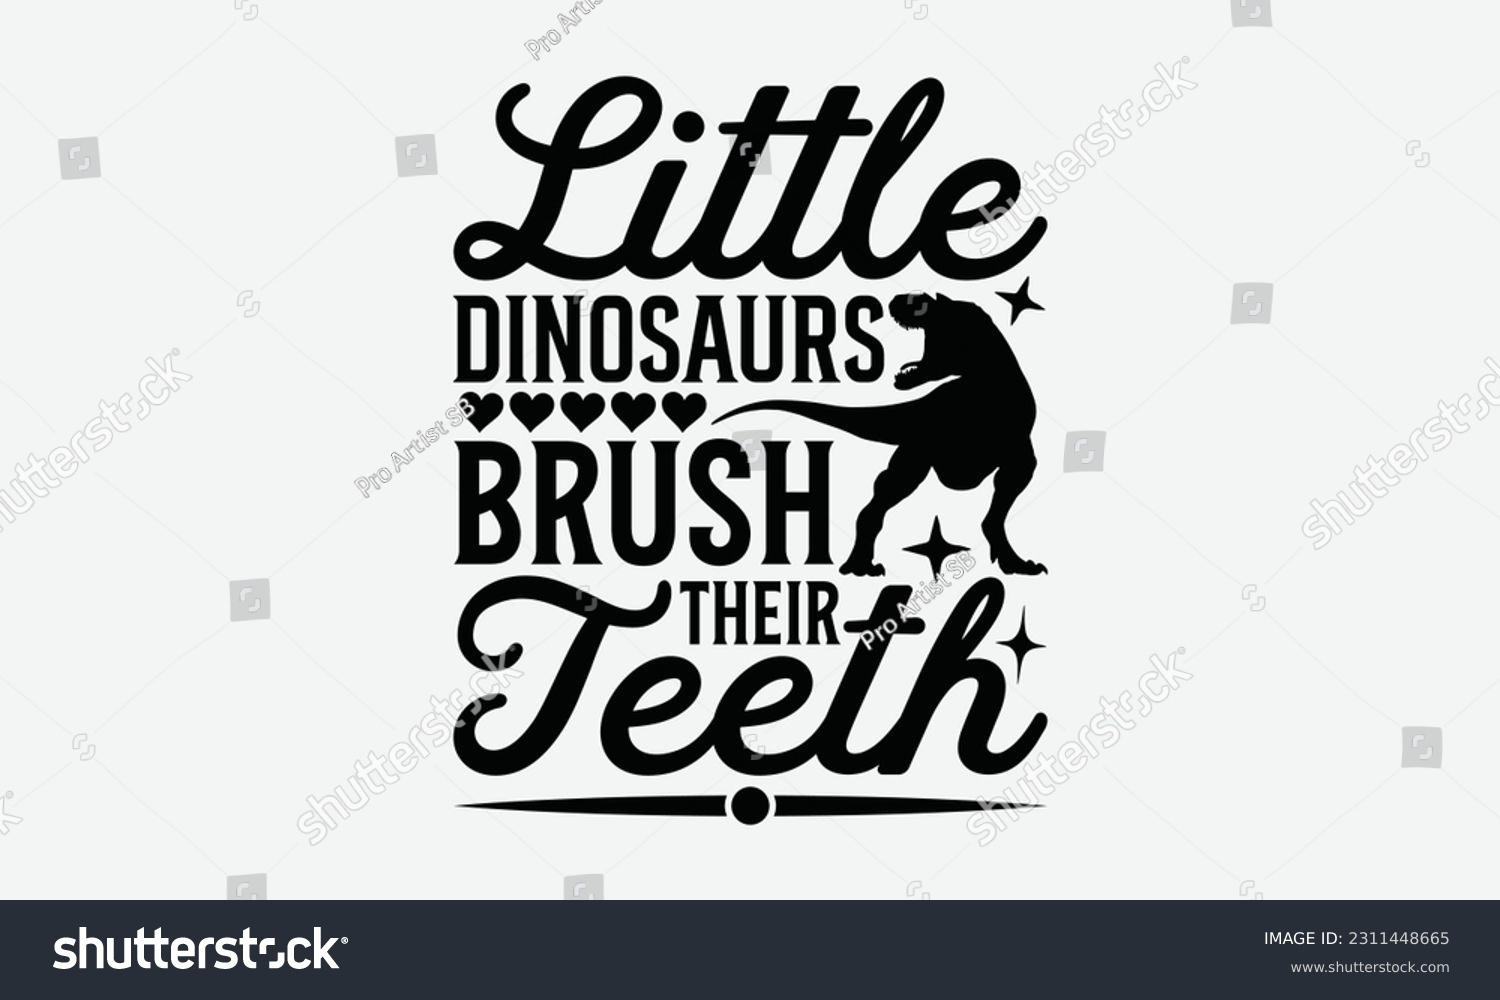 SVG of Little Dinosaurs Brush Their Teeth - Dinosaur SVG Design, Motivational Inspirational T-shirt Quotes, Hand Drawn Vintage Illustration With Hand-Lettering And Decoration Elements. svg